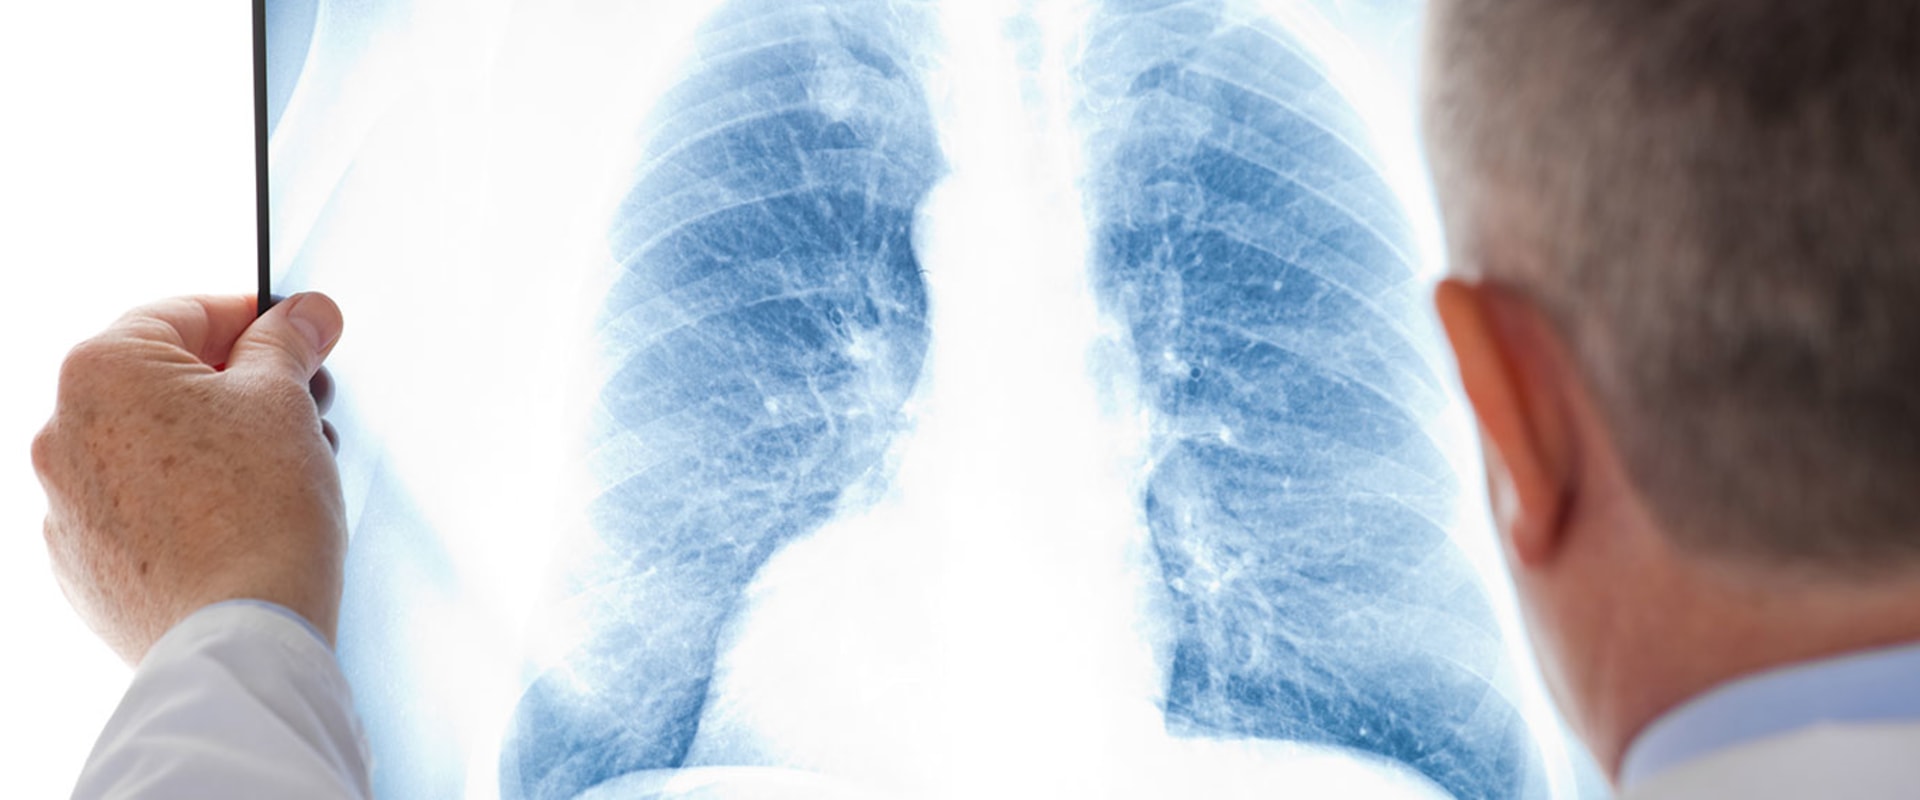 Can lungs heal after 20 years of smoking?